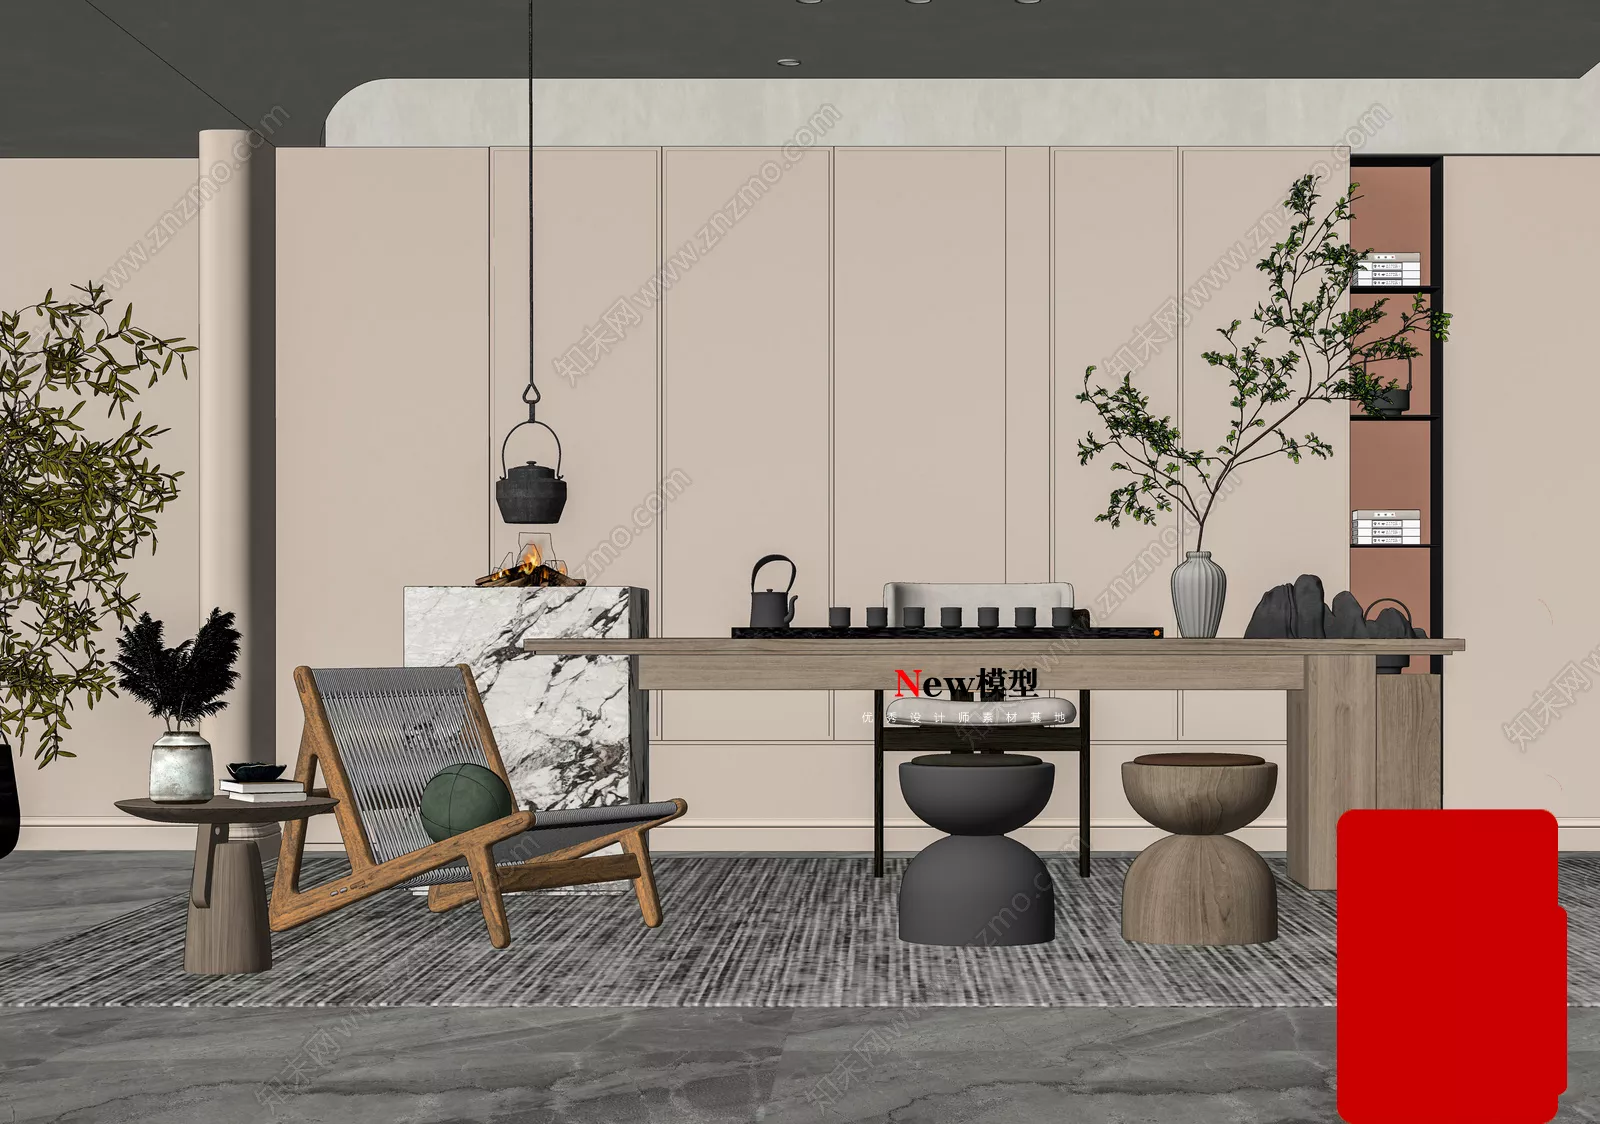 WABI SABI INTERIOR COLLECTION - SKETCHUP 3D SCENE - VRAY OR ENSCAPE - ID17727